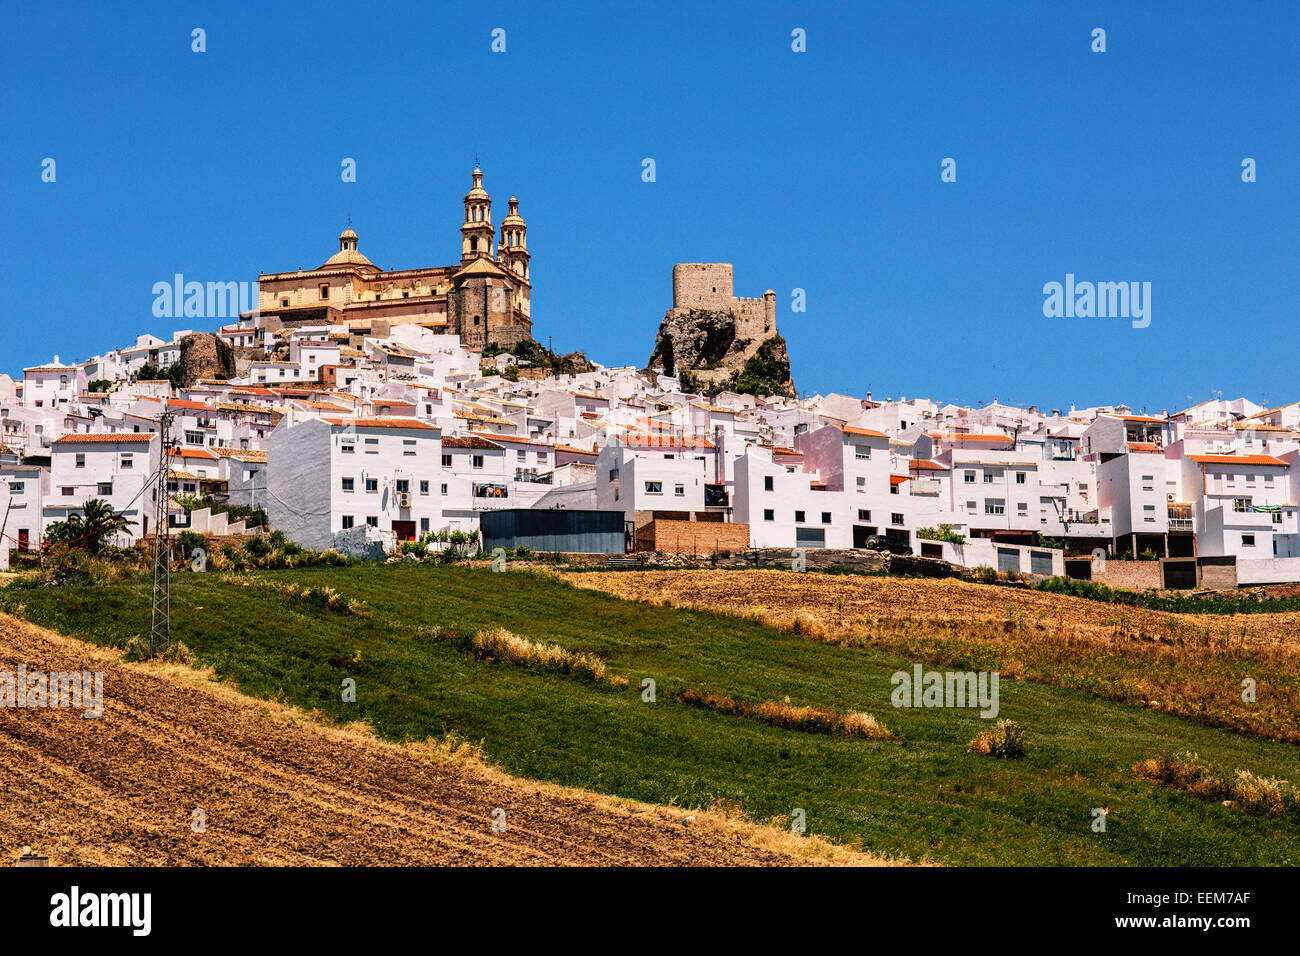 Spain, Andalusia, Pueblos Blancos, View of white town and fields in foreground Stock Photo